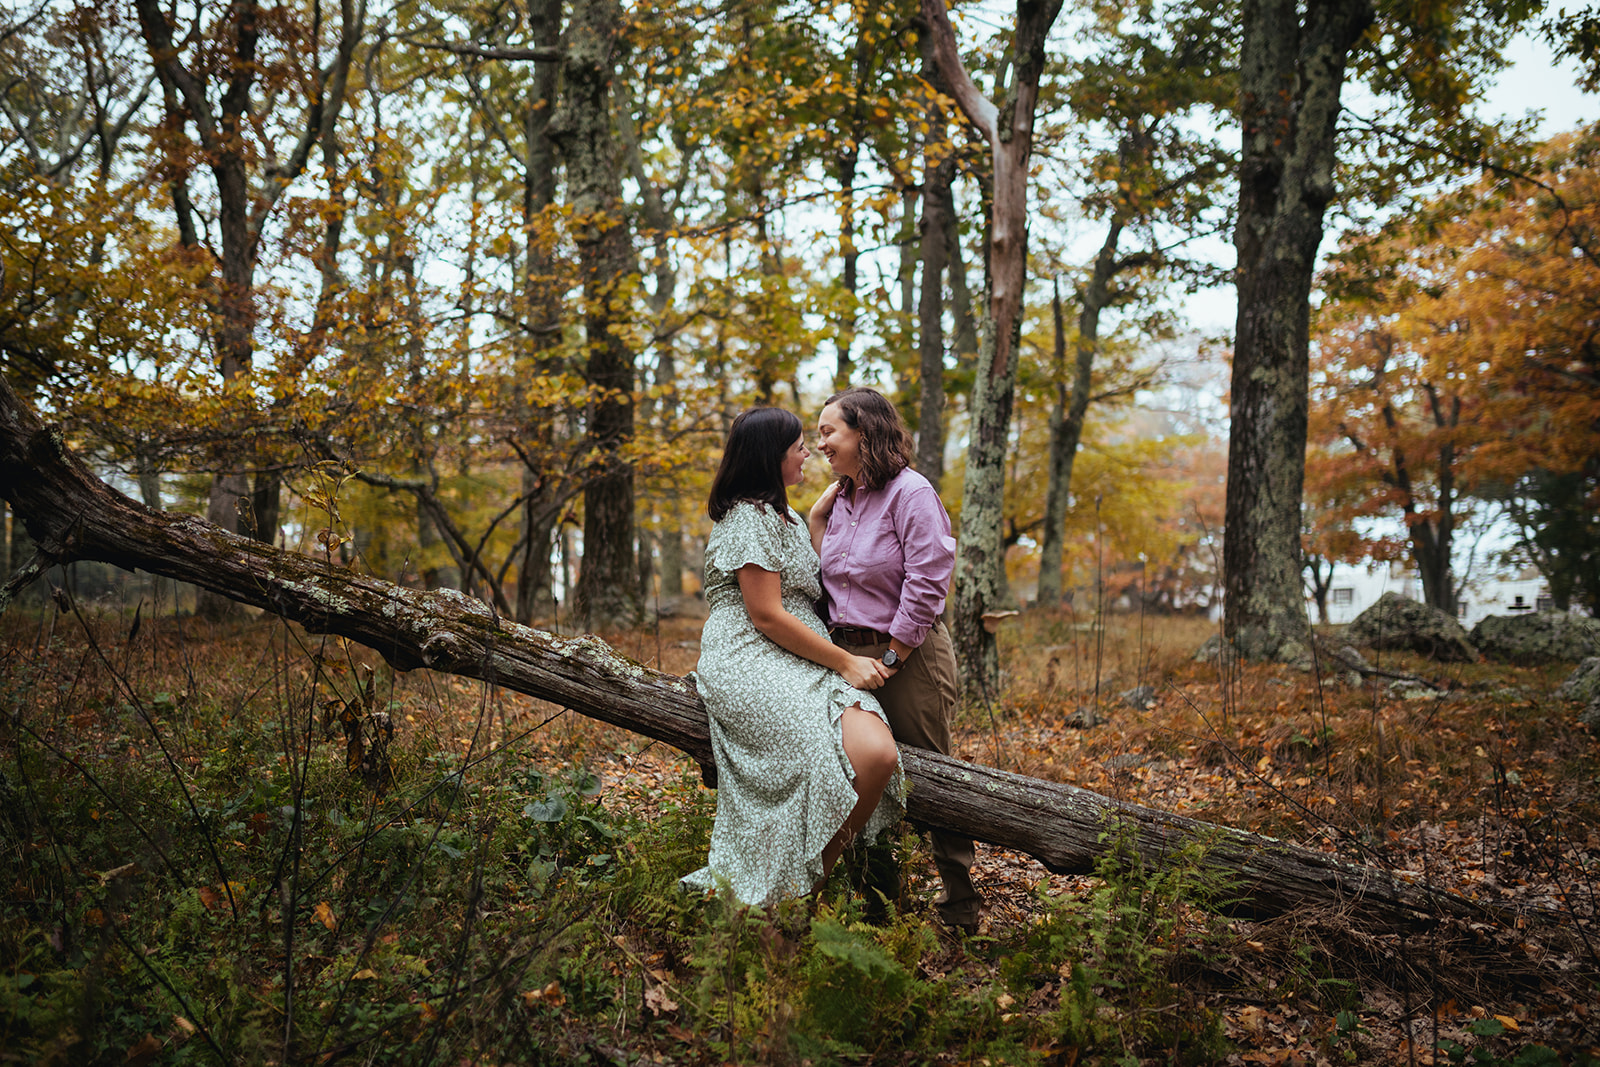 Woody queer engagement photo ideas